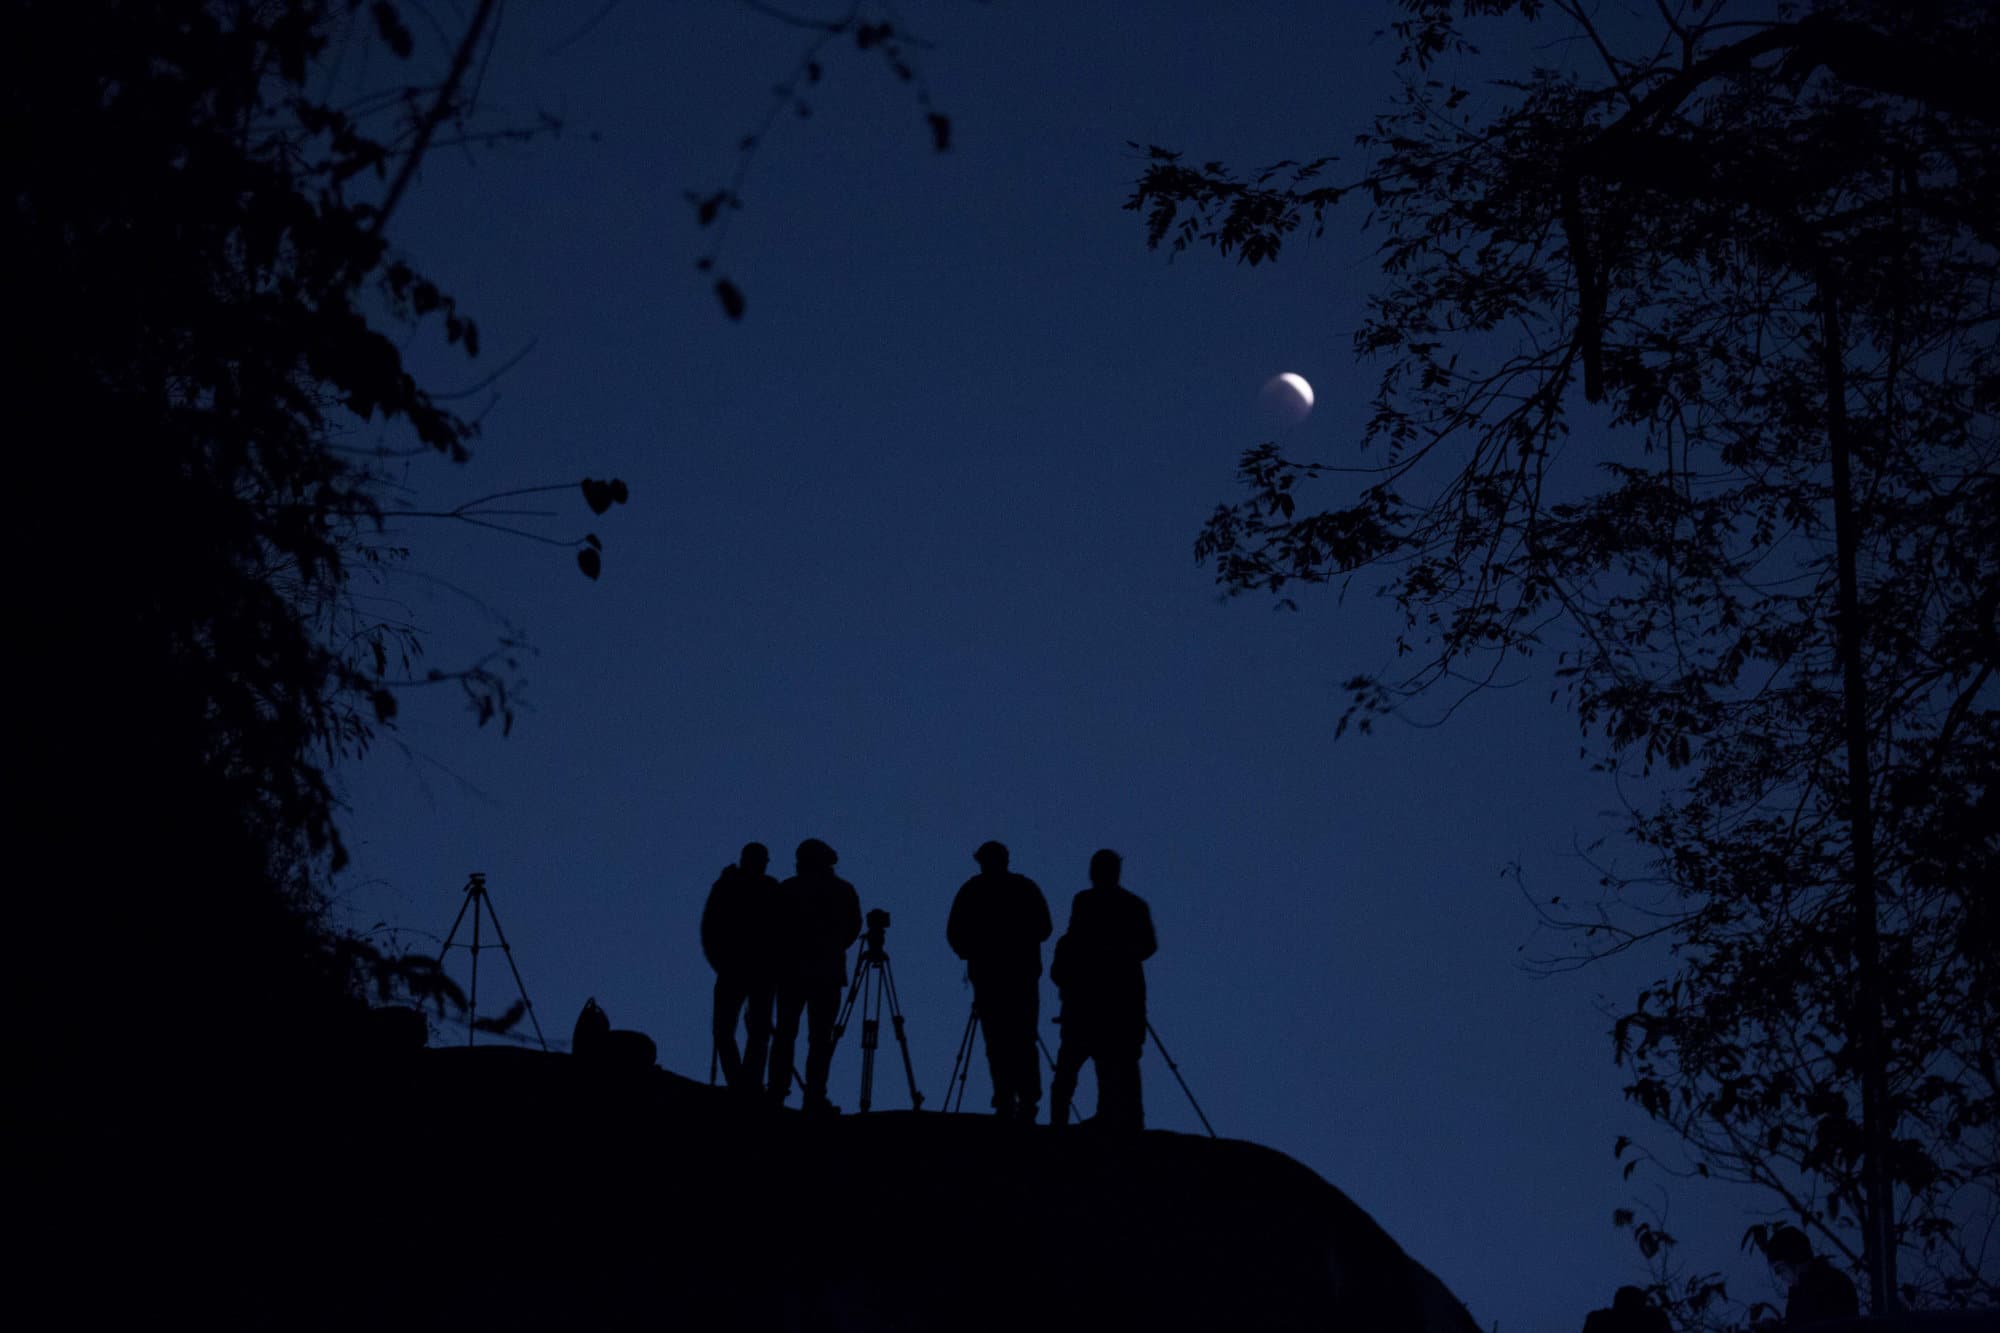 People use telescopes to observe the lunar eclipse in Gauhati, India, Wednesday, Jan. 31, 2018. The moon is putting on a rare cosmic show. It's the first time in 35 years a blue moon has synced up with a supermoon and a total lunar eclipse. NASA is calling it a lunar trifecta: the first super blue blood moon since 1982. That combination won't happen again until 2037. (AP Photo/Anupam Nath)